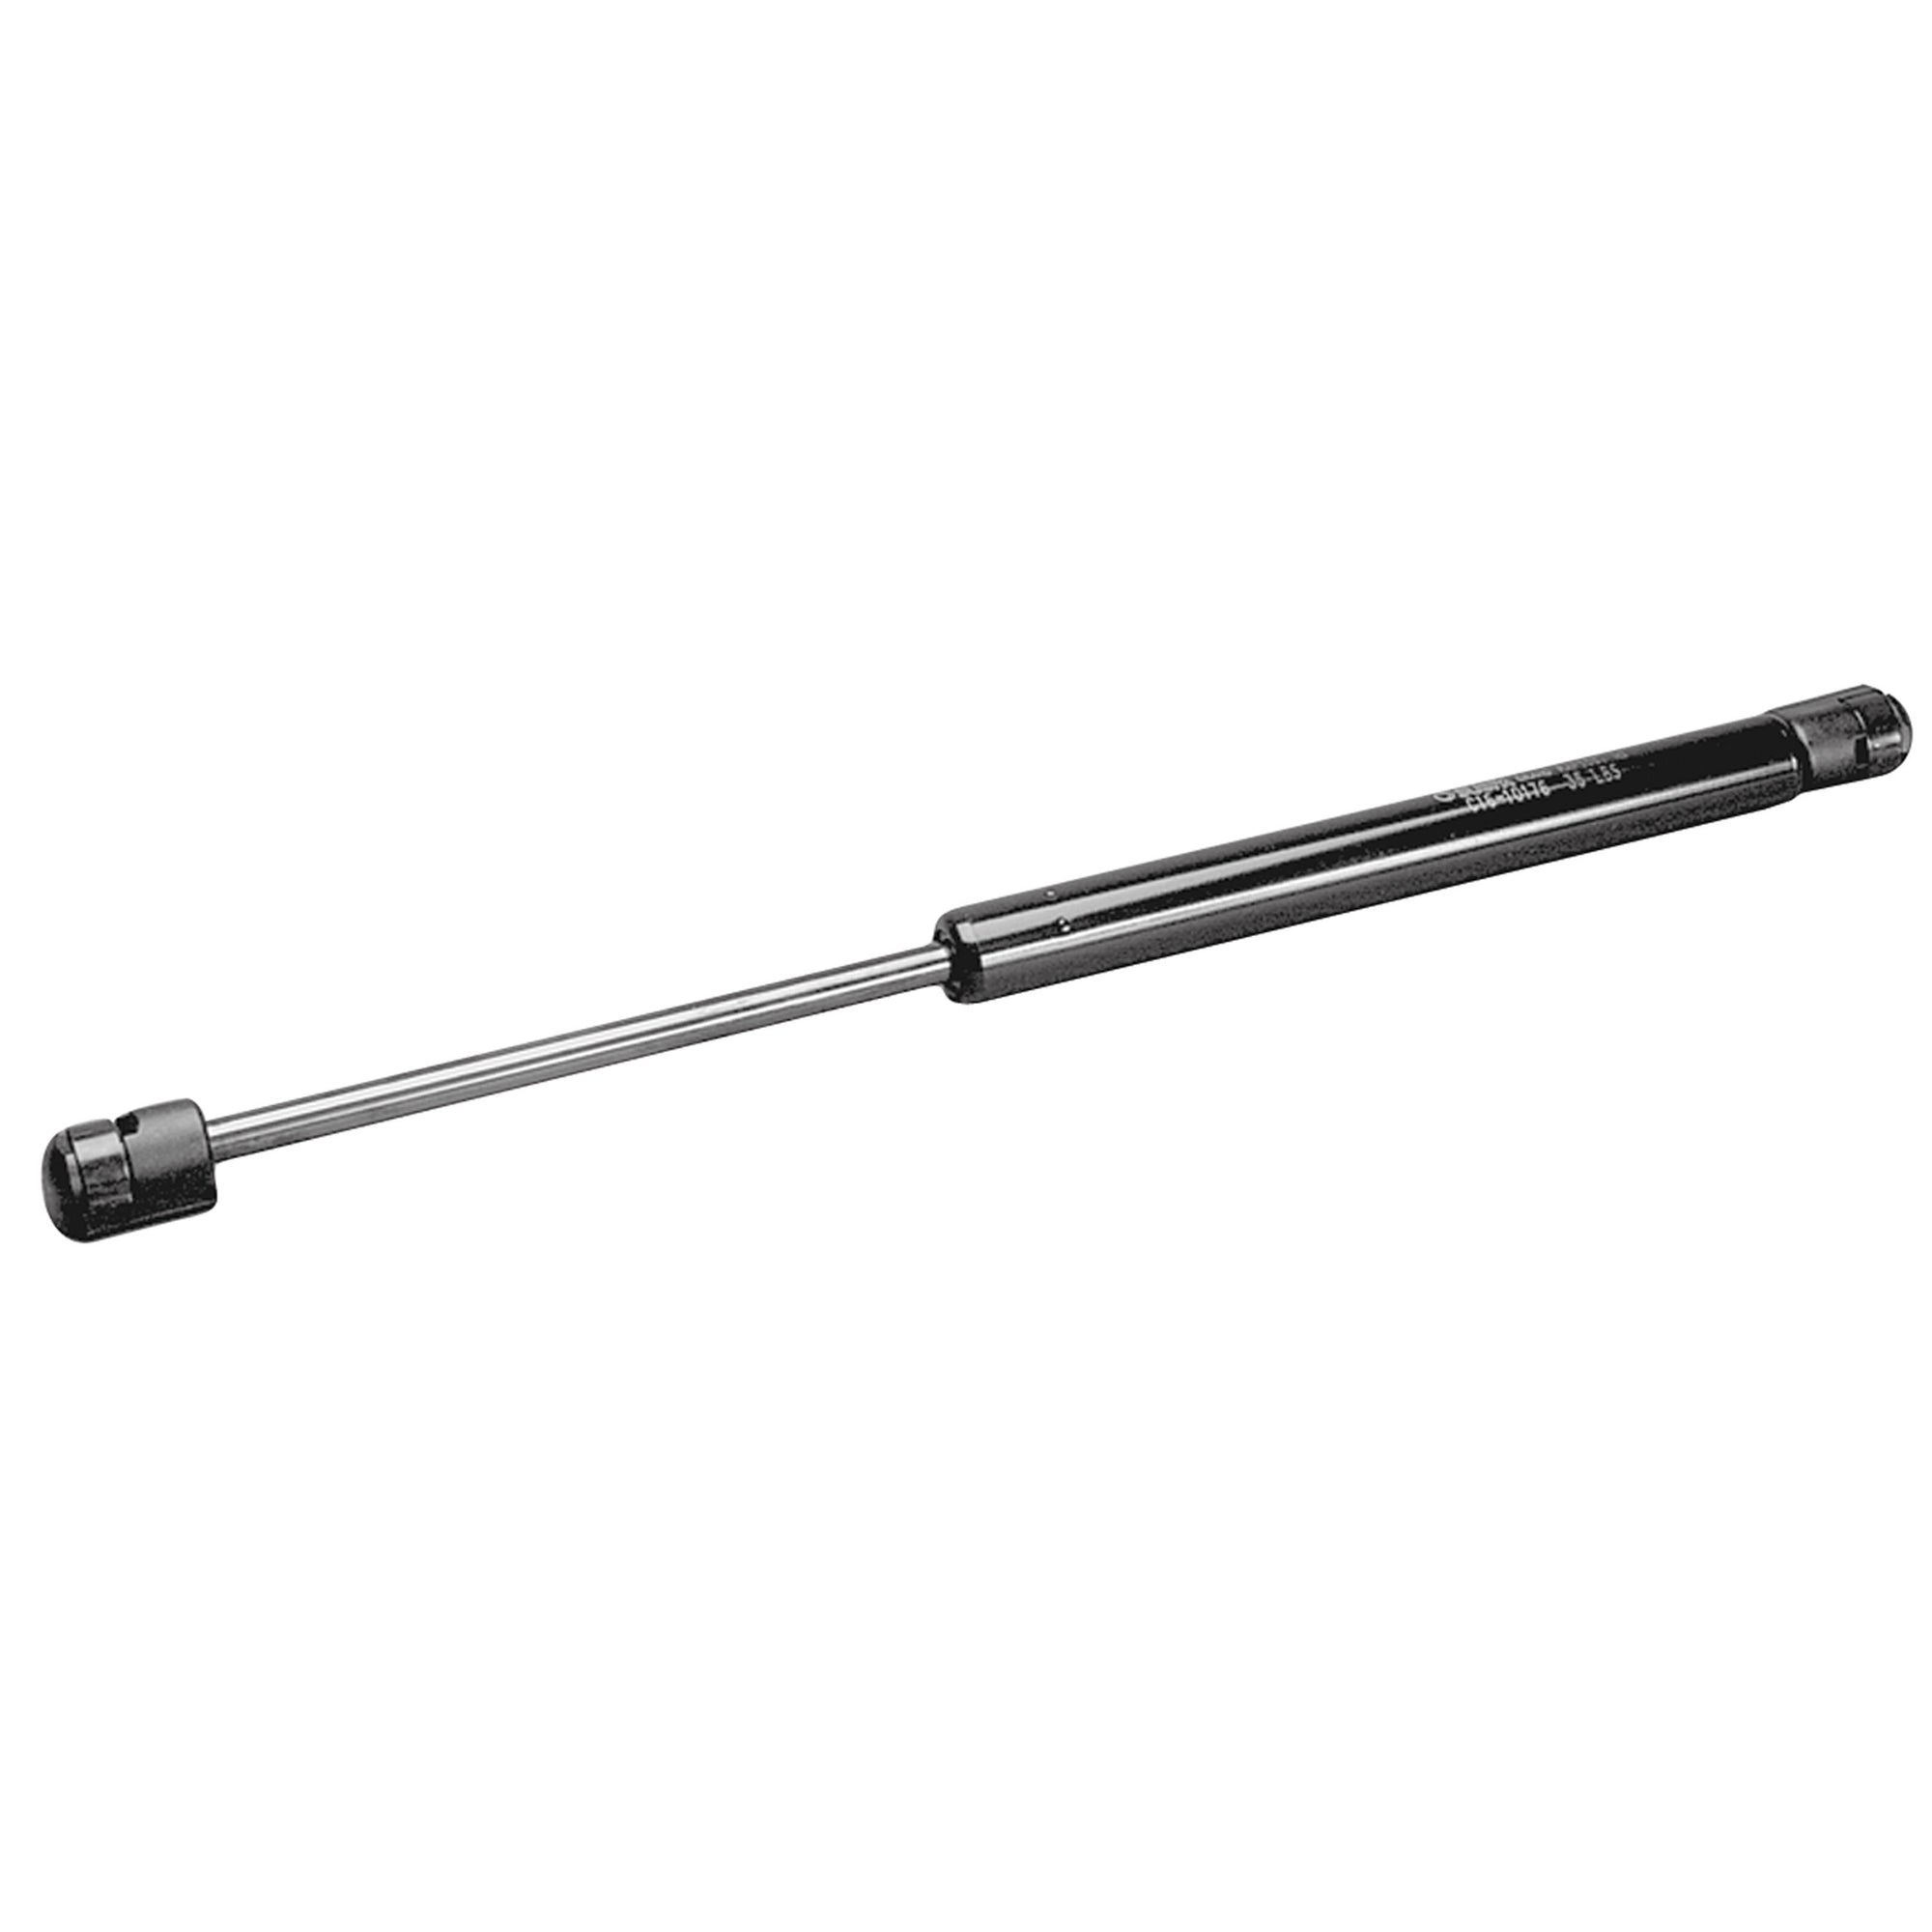 AP Products 010-075 Gas Spring - 17.13" Ext Length, 6.30" Stroke Rod Length, 55 lb. P1 Force